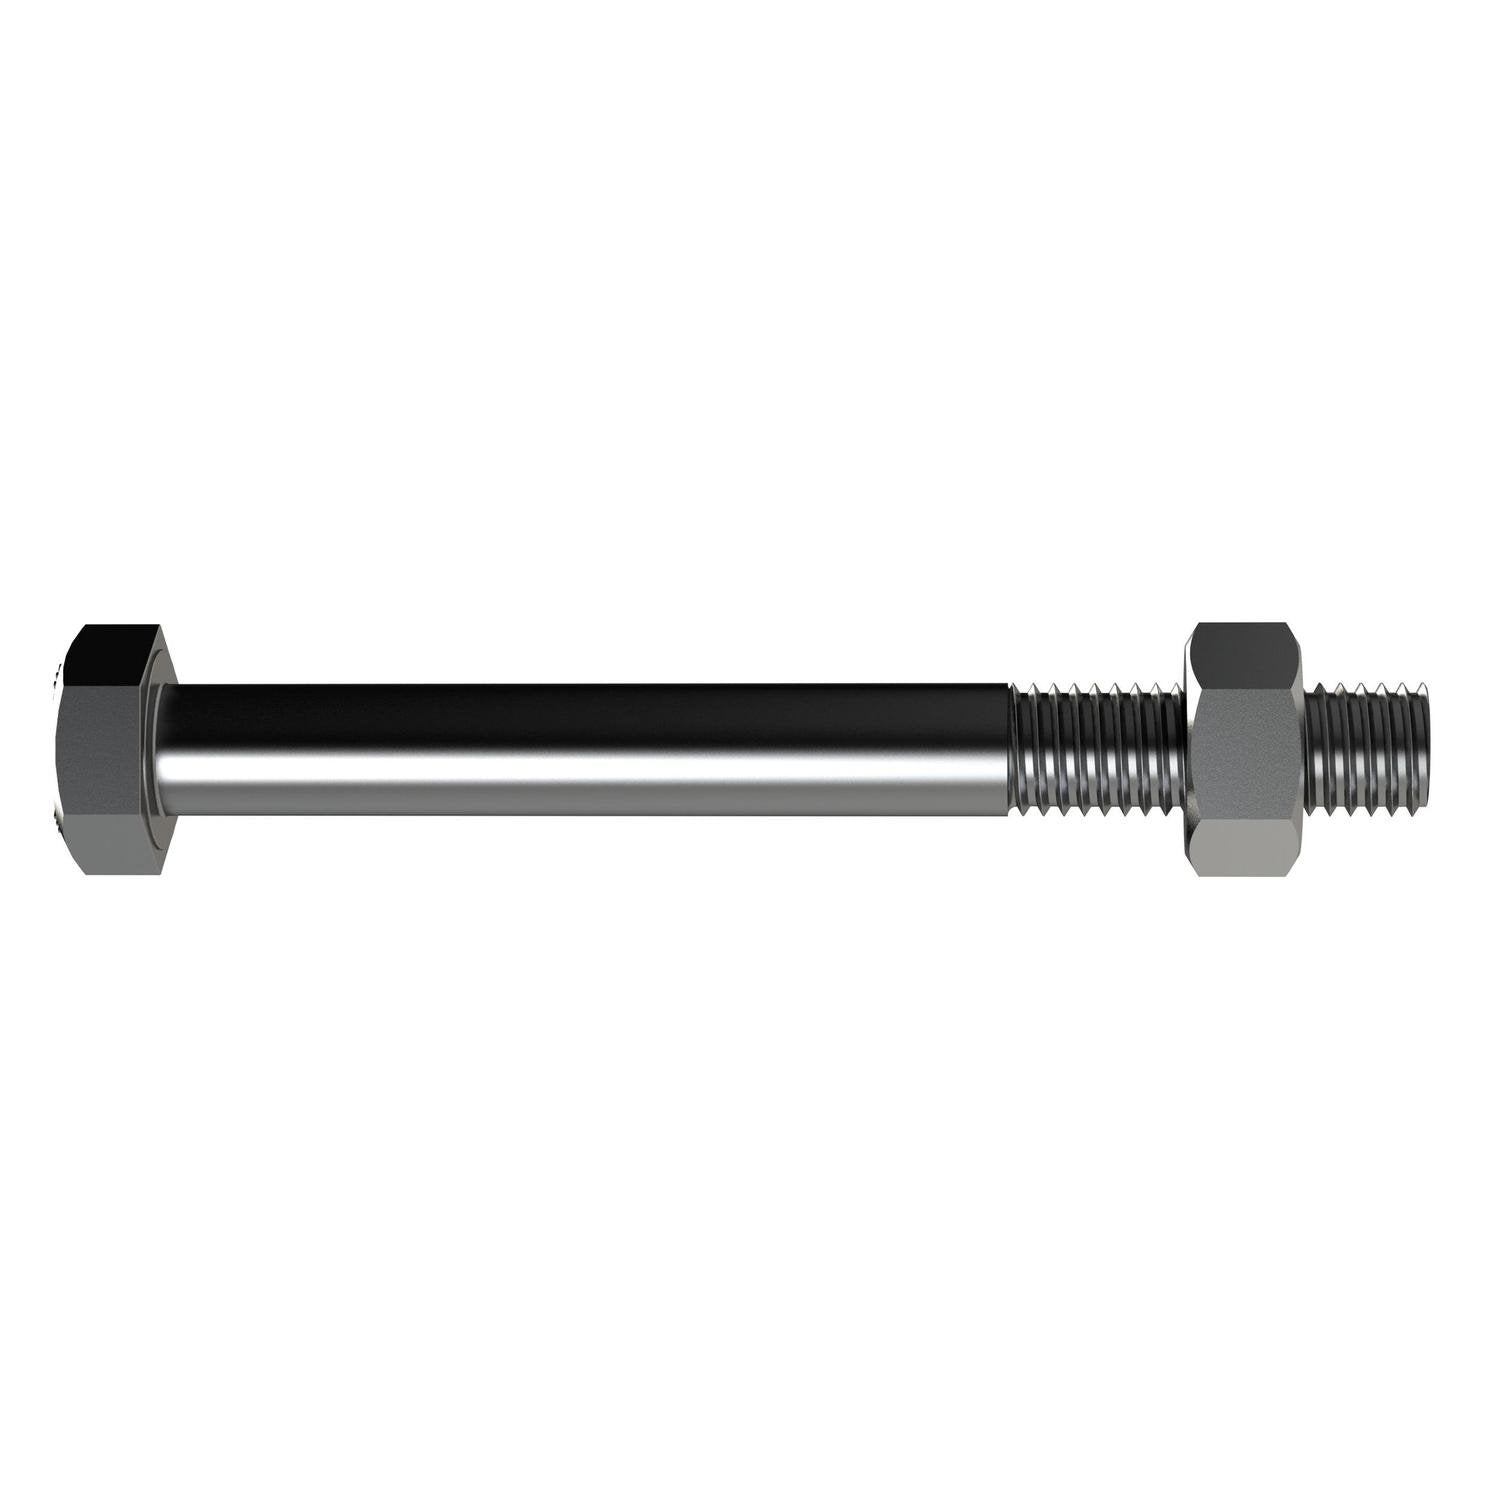 Bremick Engineer Bolts M12 X 280Mm Stainless Steel 316